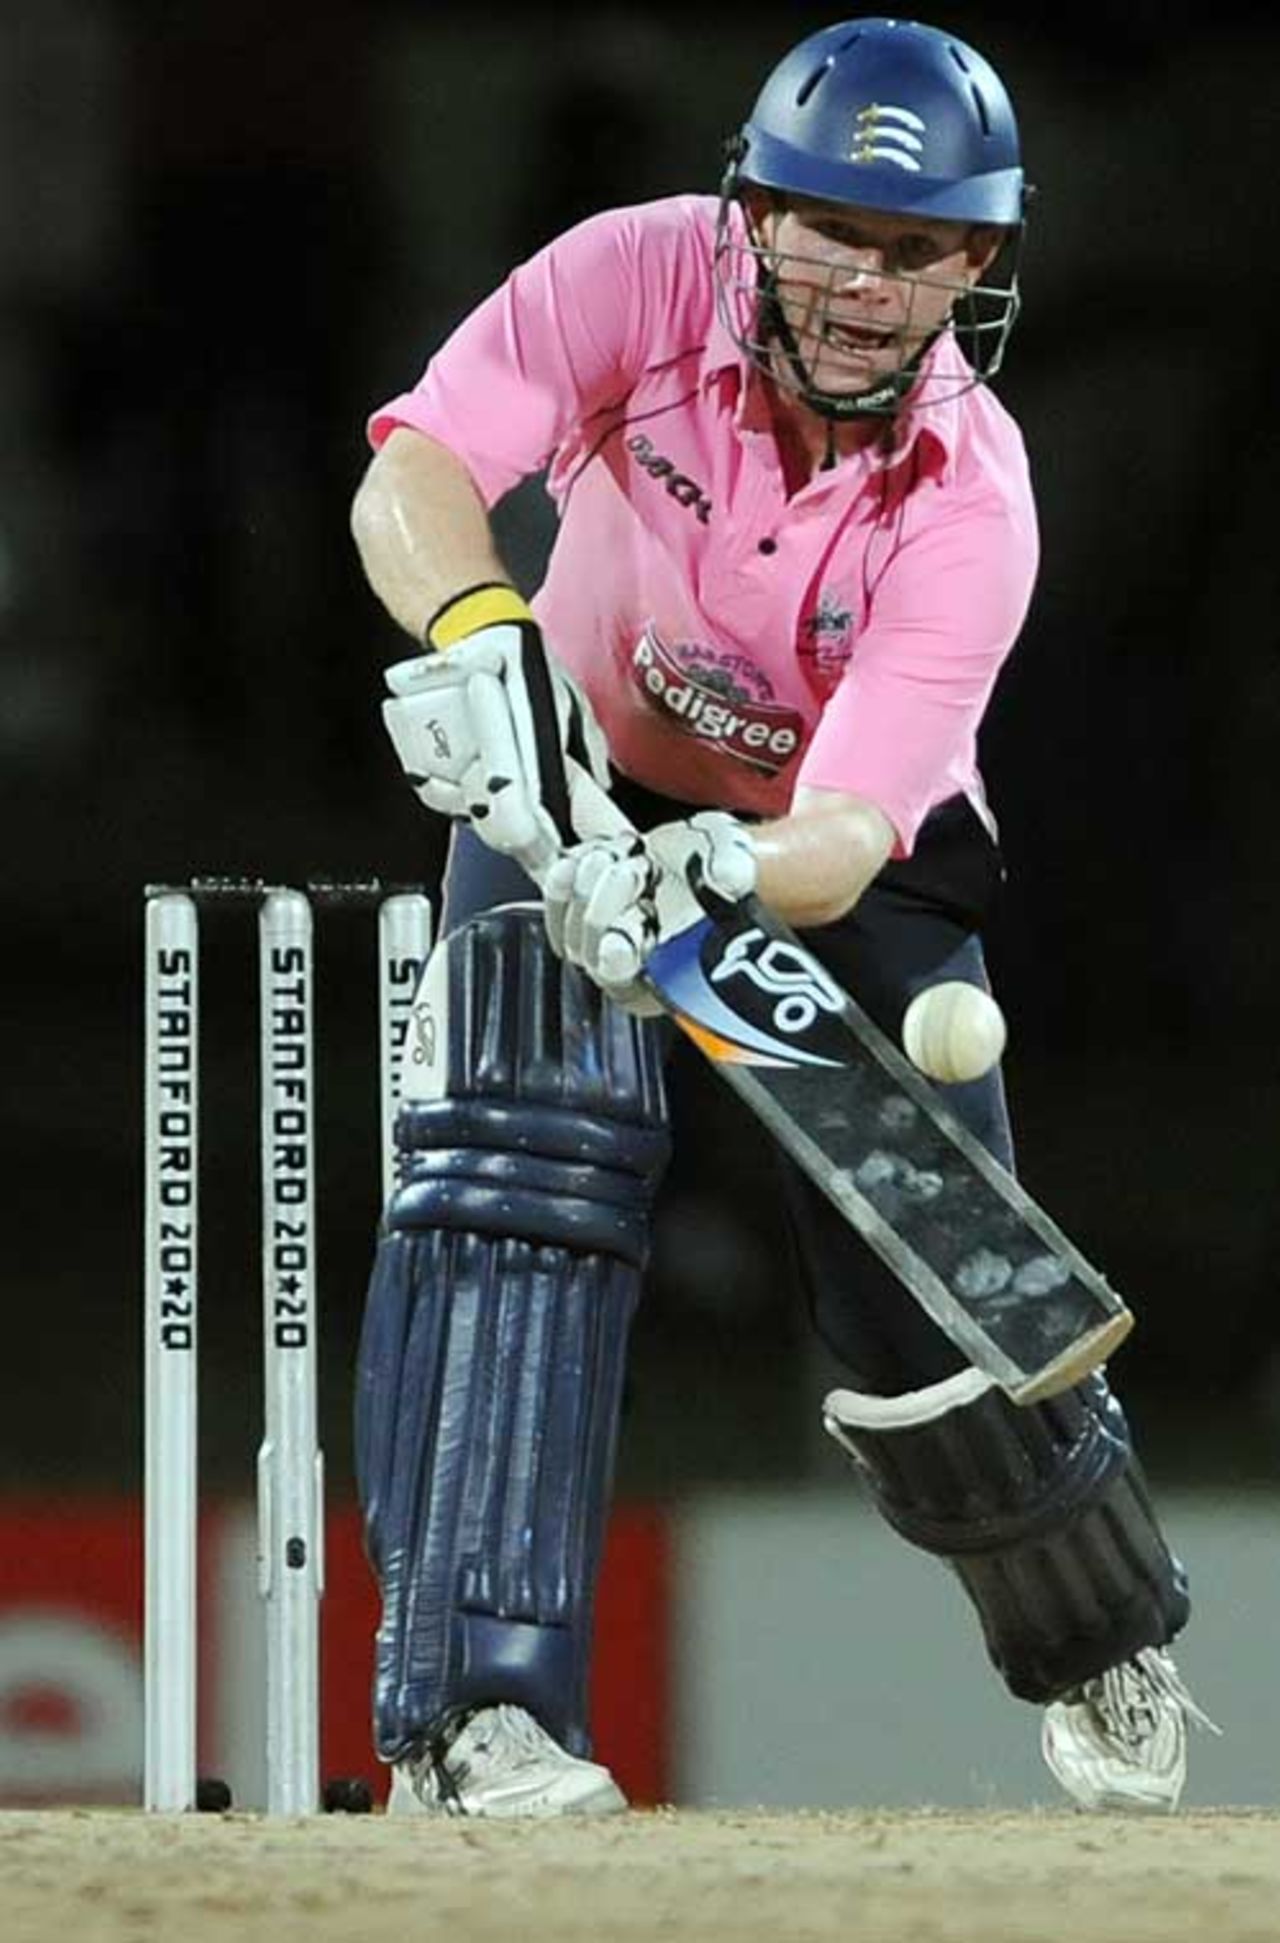 Eoin Morgan tries to invent something to increase Middlesex's scoring rate, Trinidad & Tobago v Middlesex, Antigua, October 27, 2008